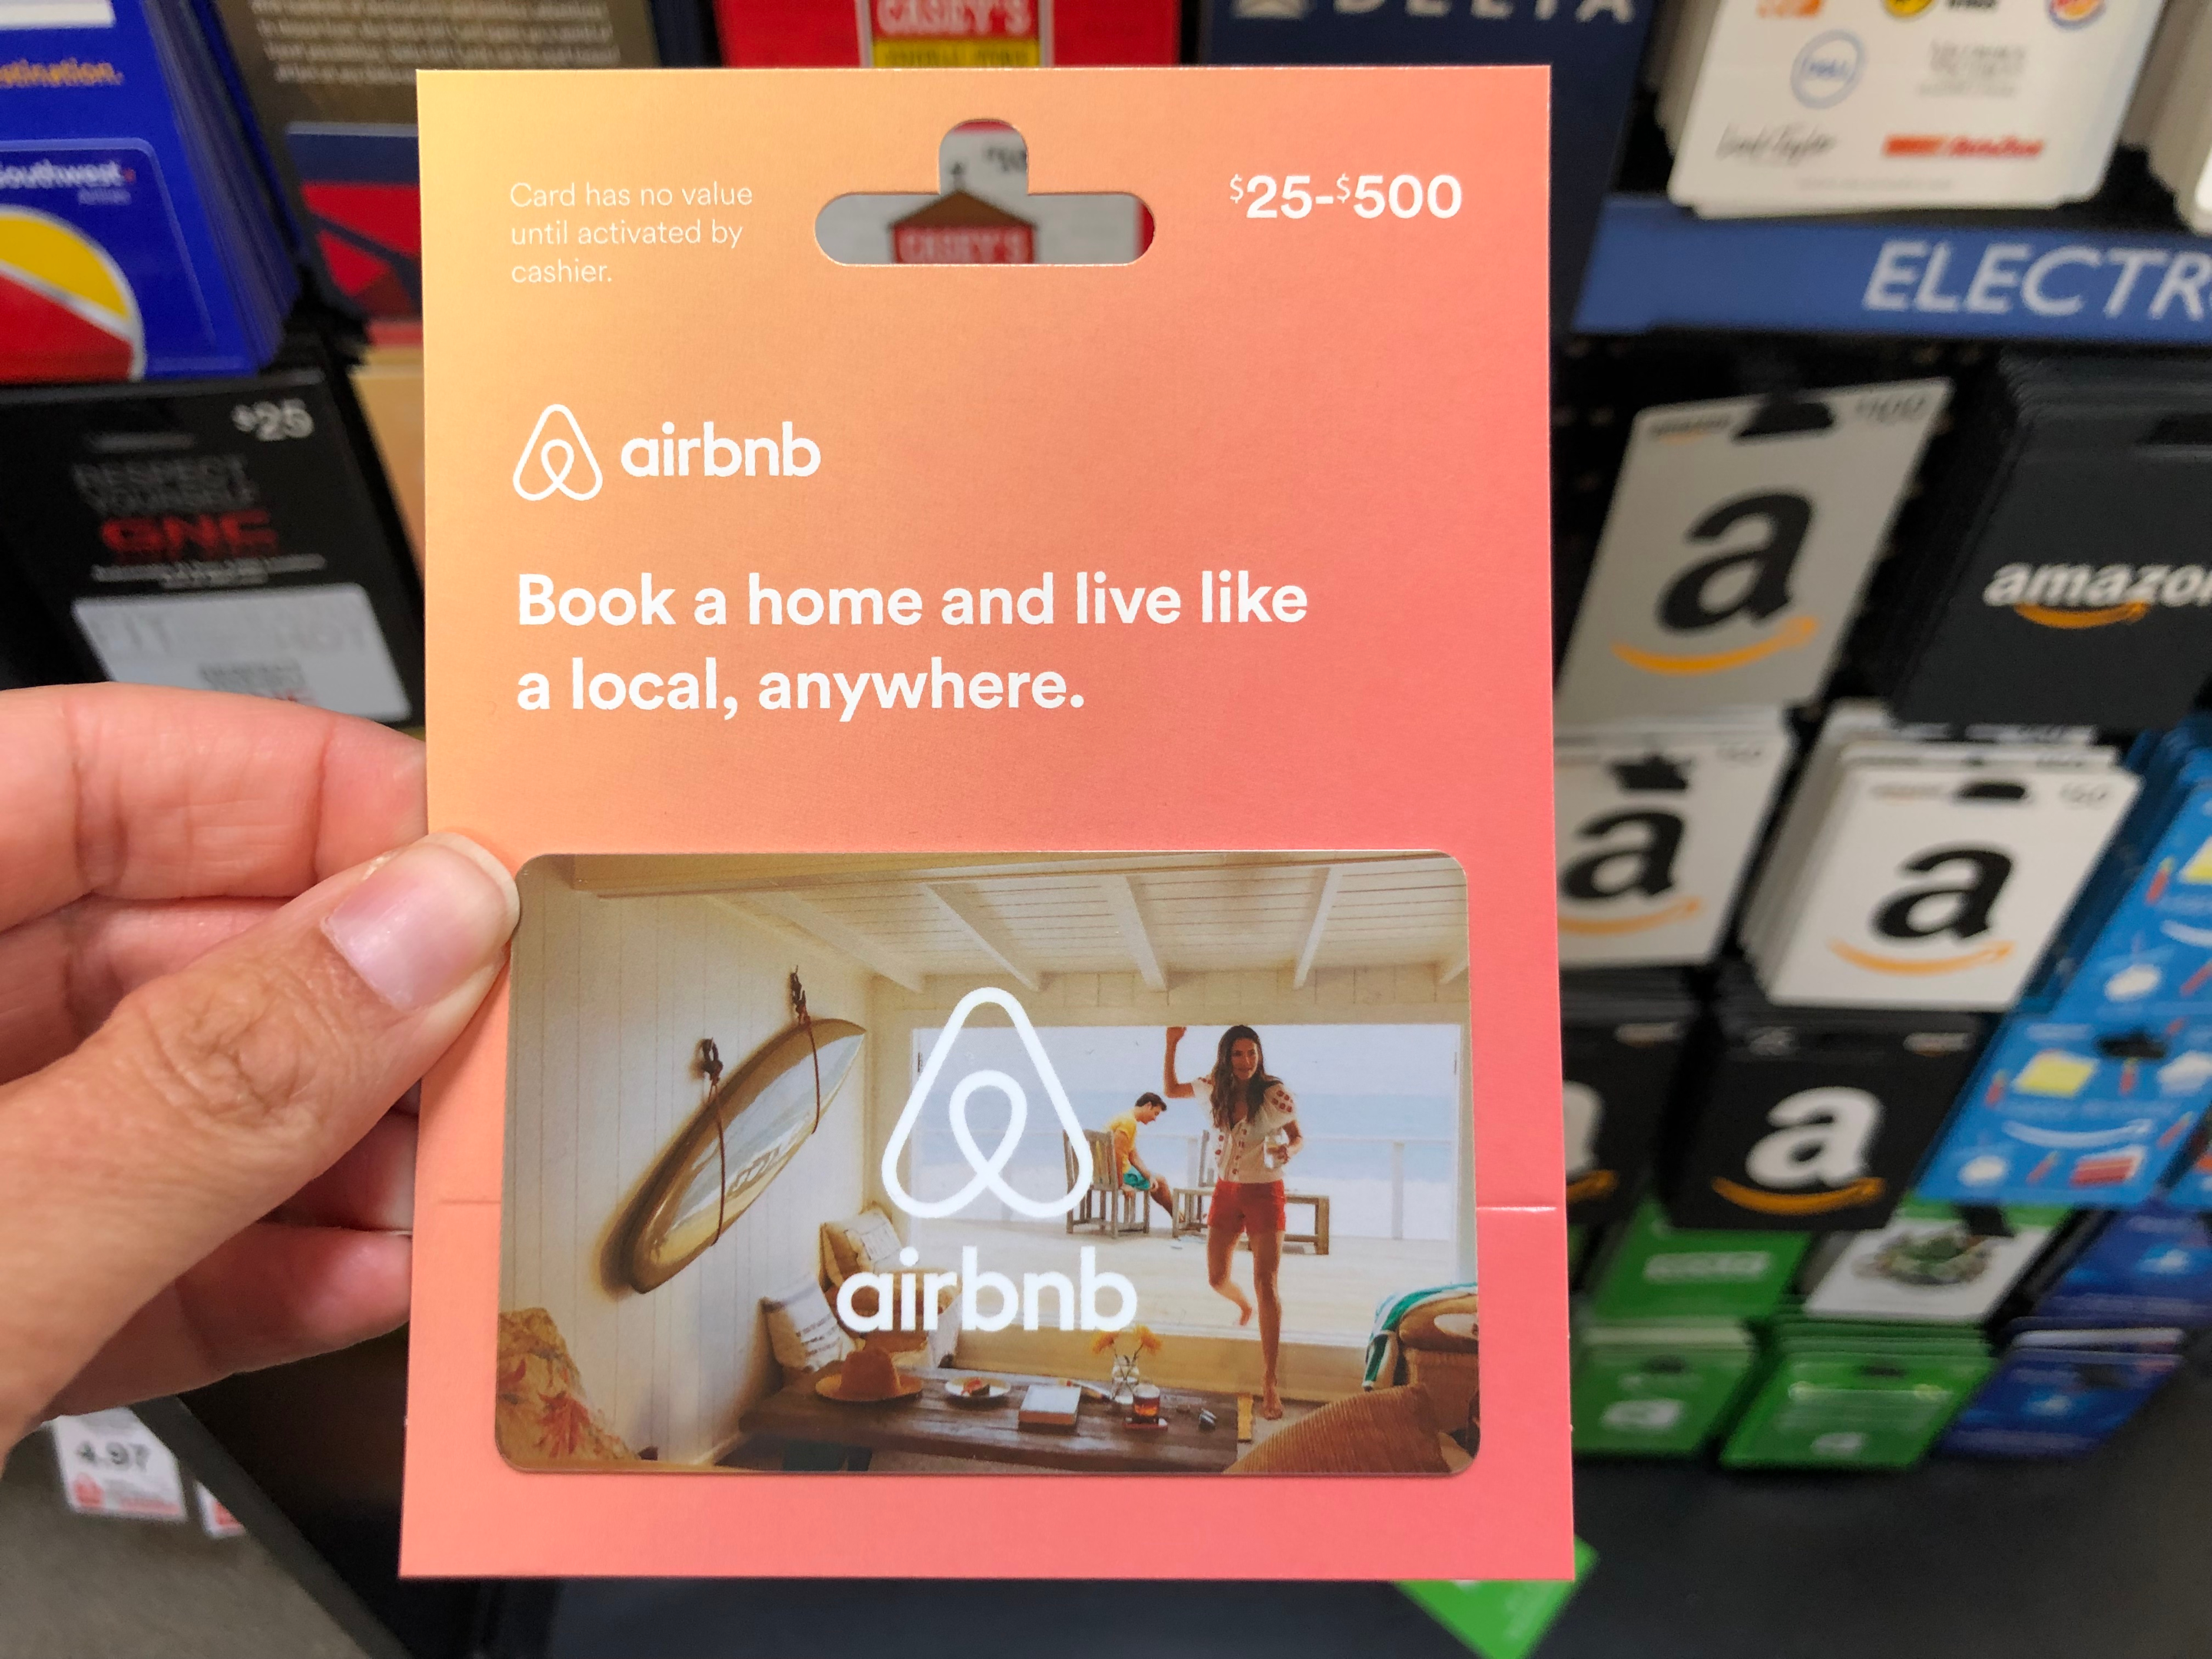 Which is better, Airbnb or VRBO? - Quora